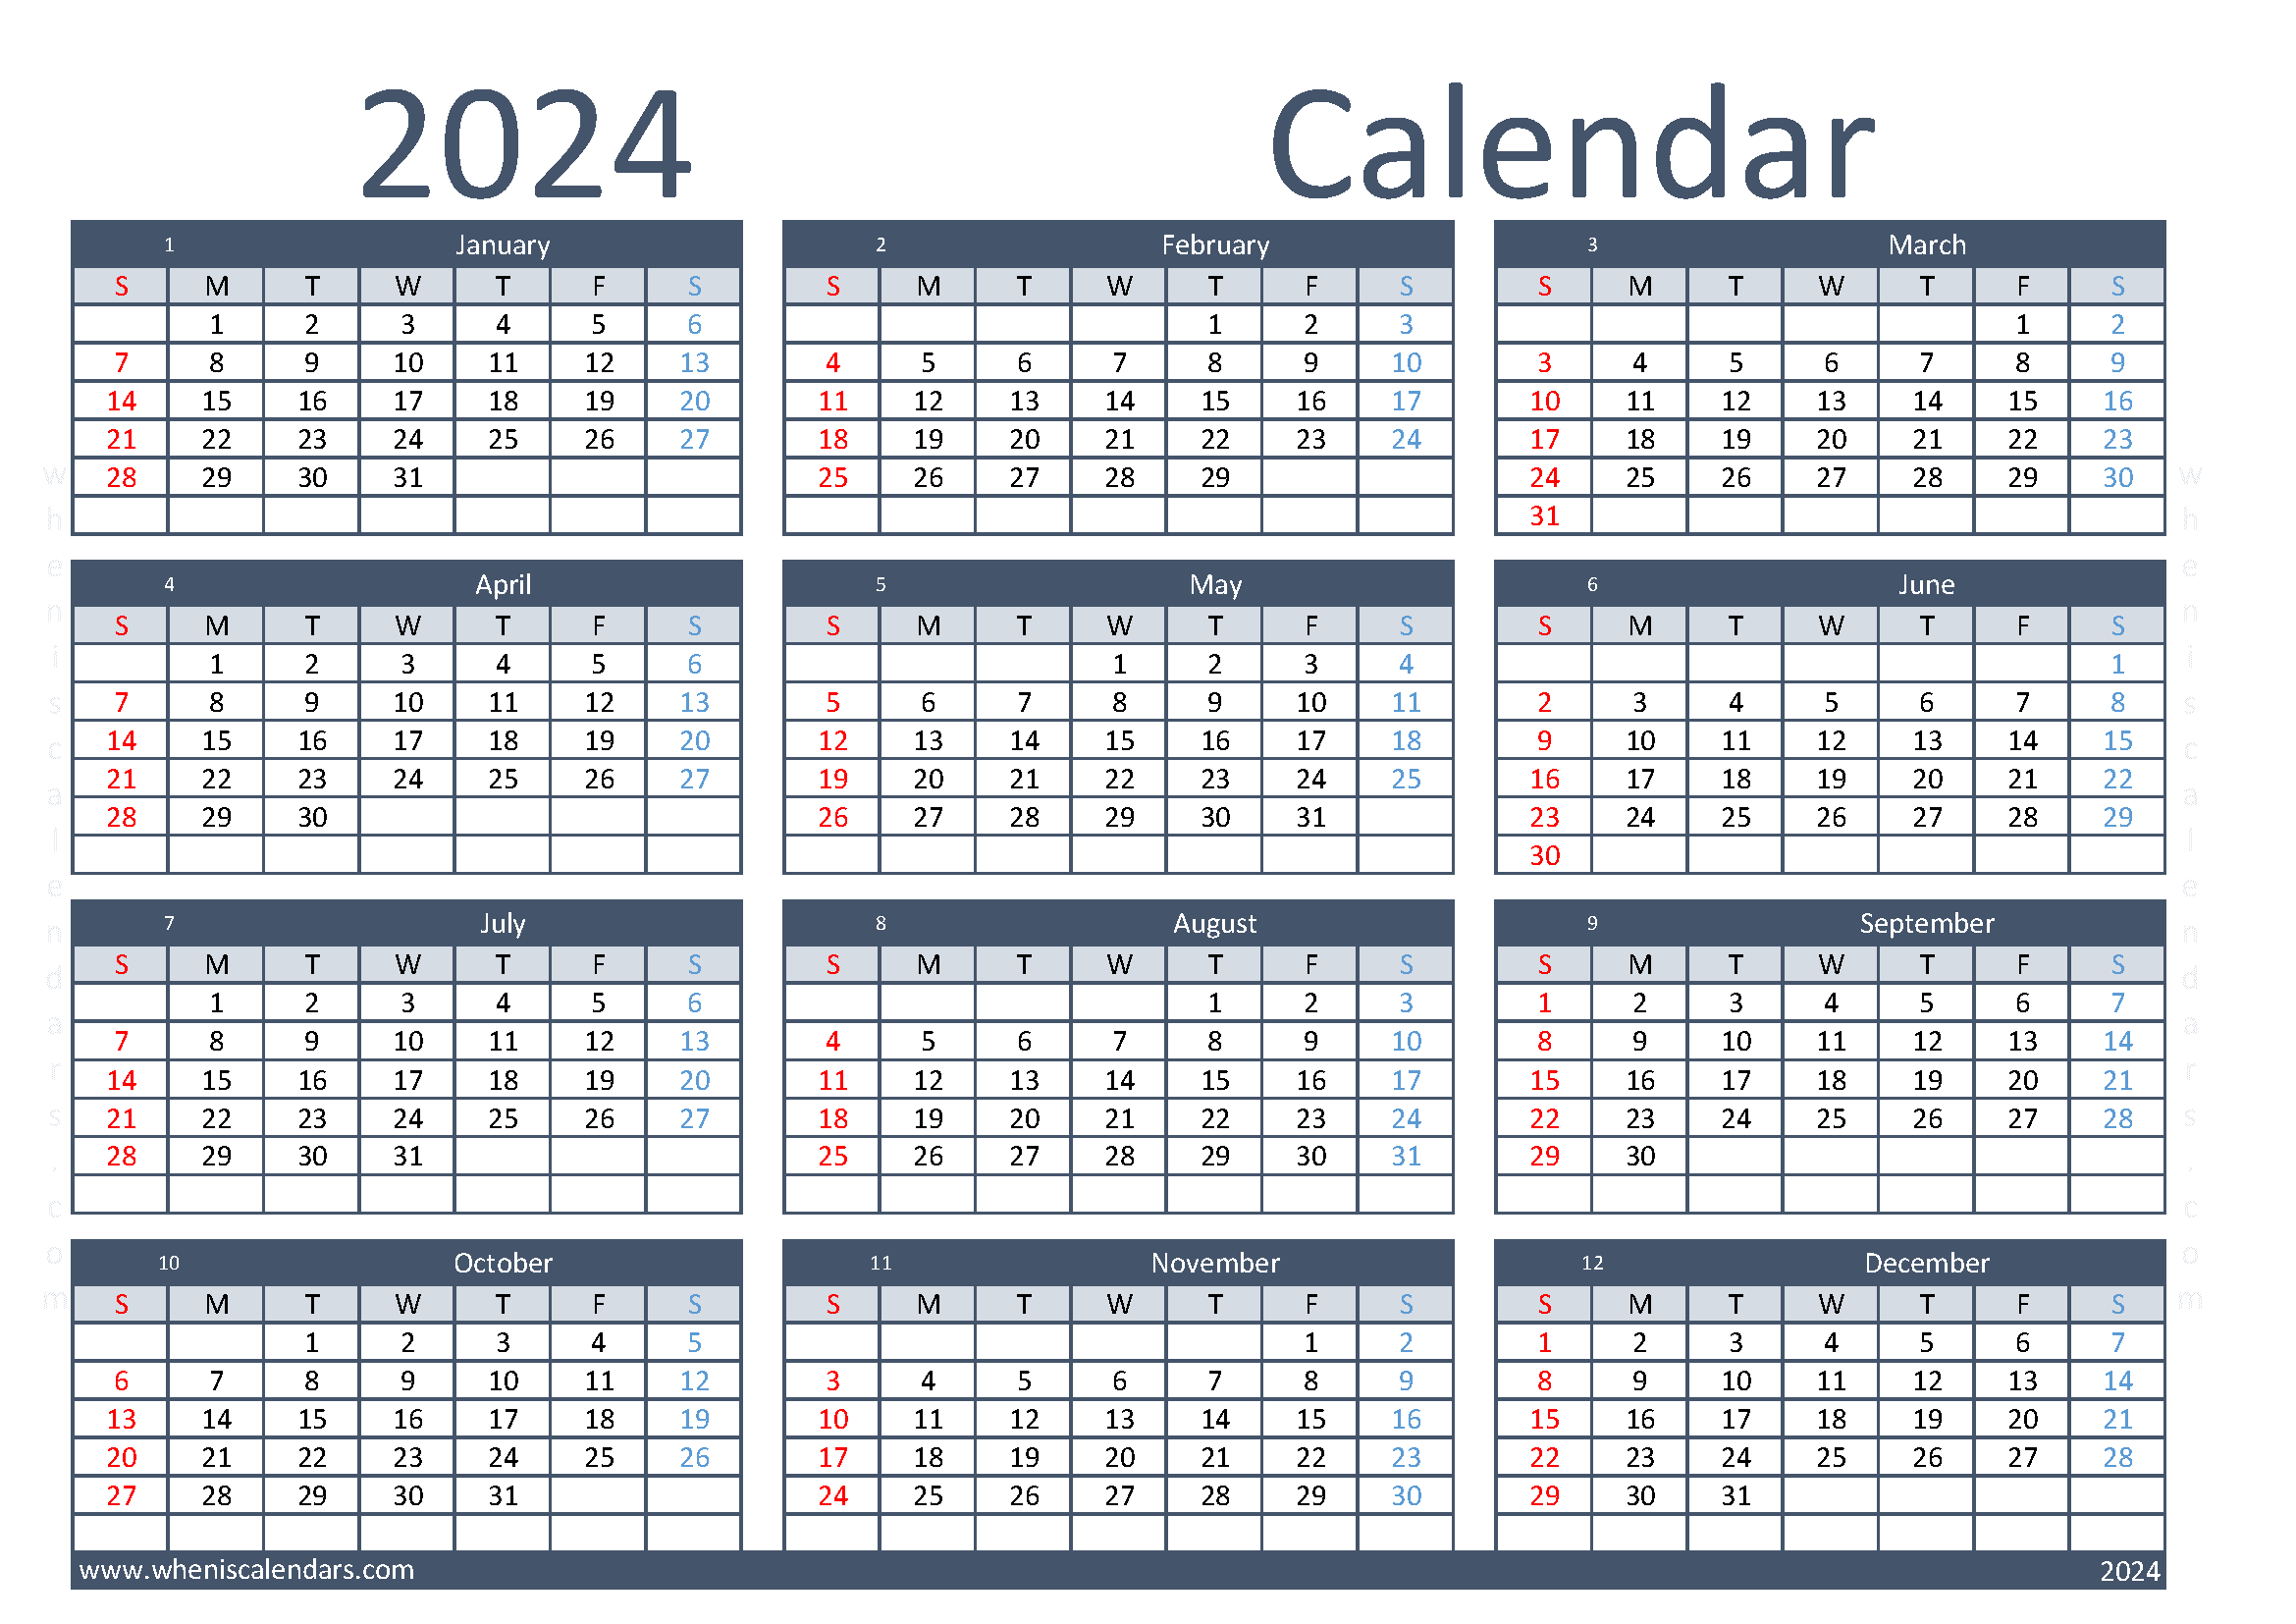 free printable 2024 Calendar yearly A4 in horizontal landscape colorful design